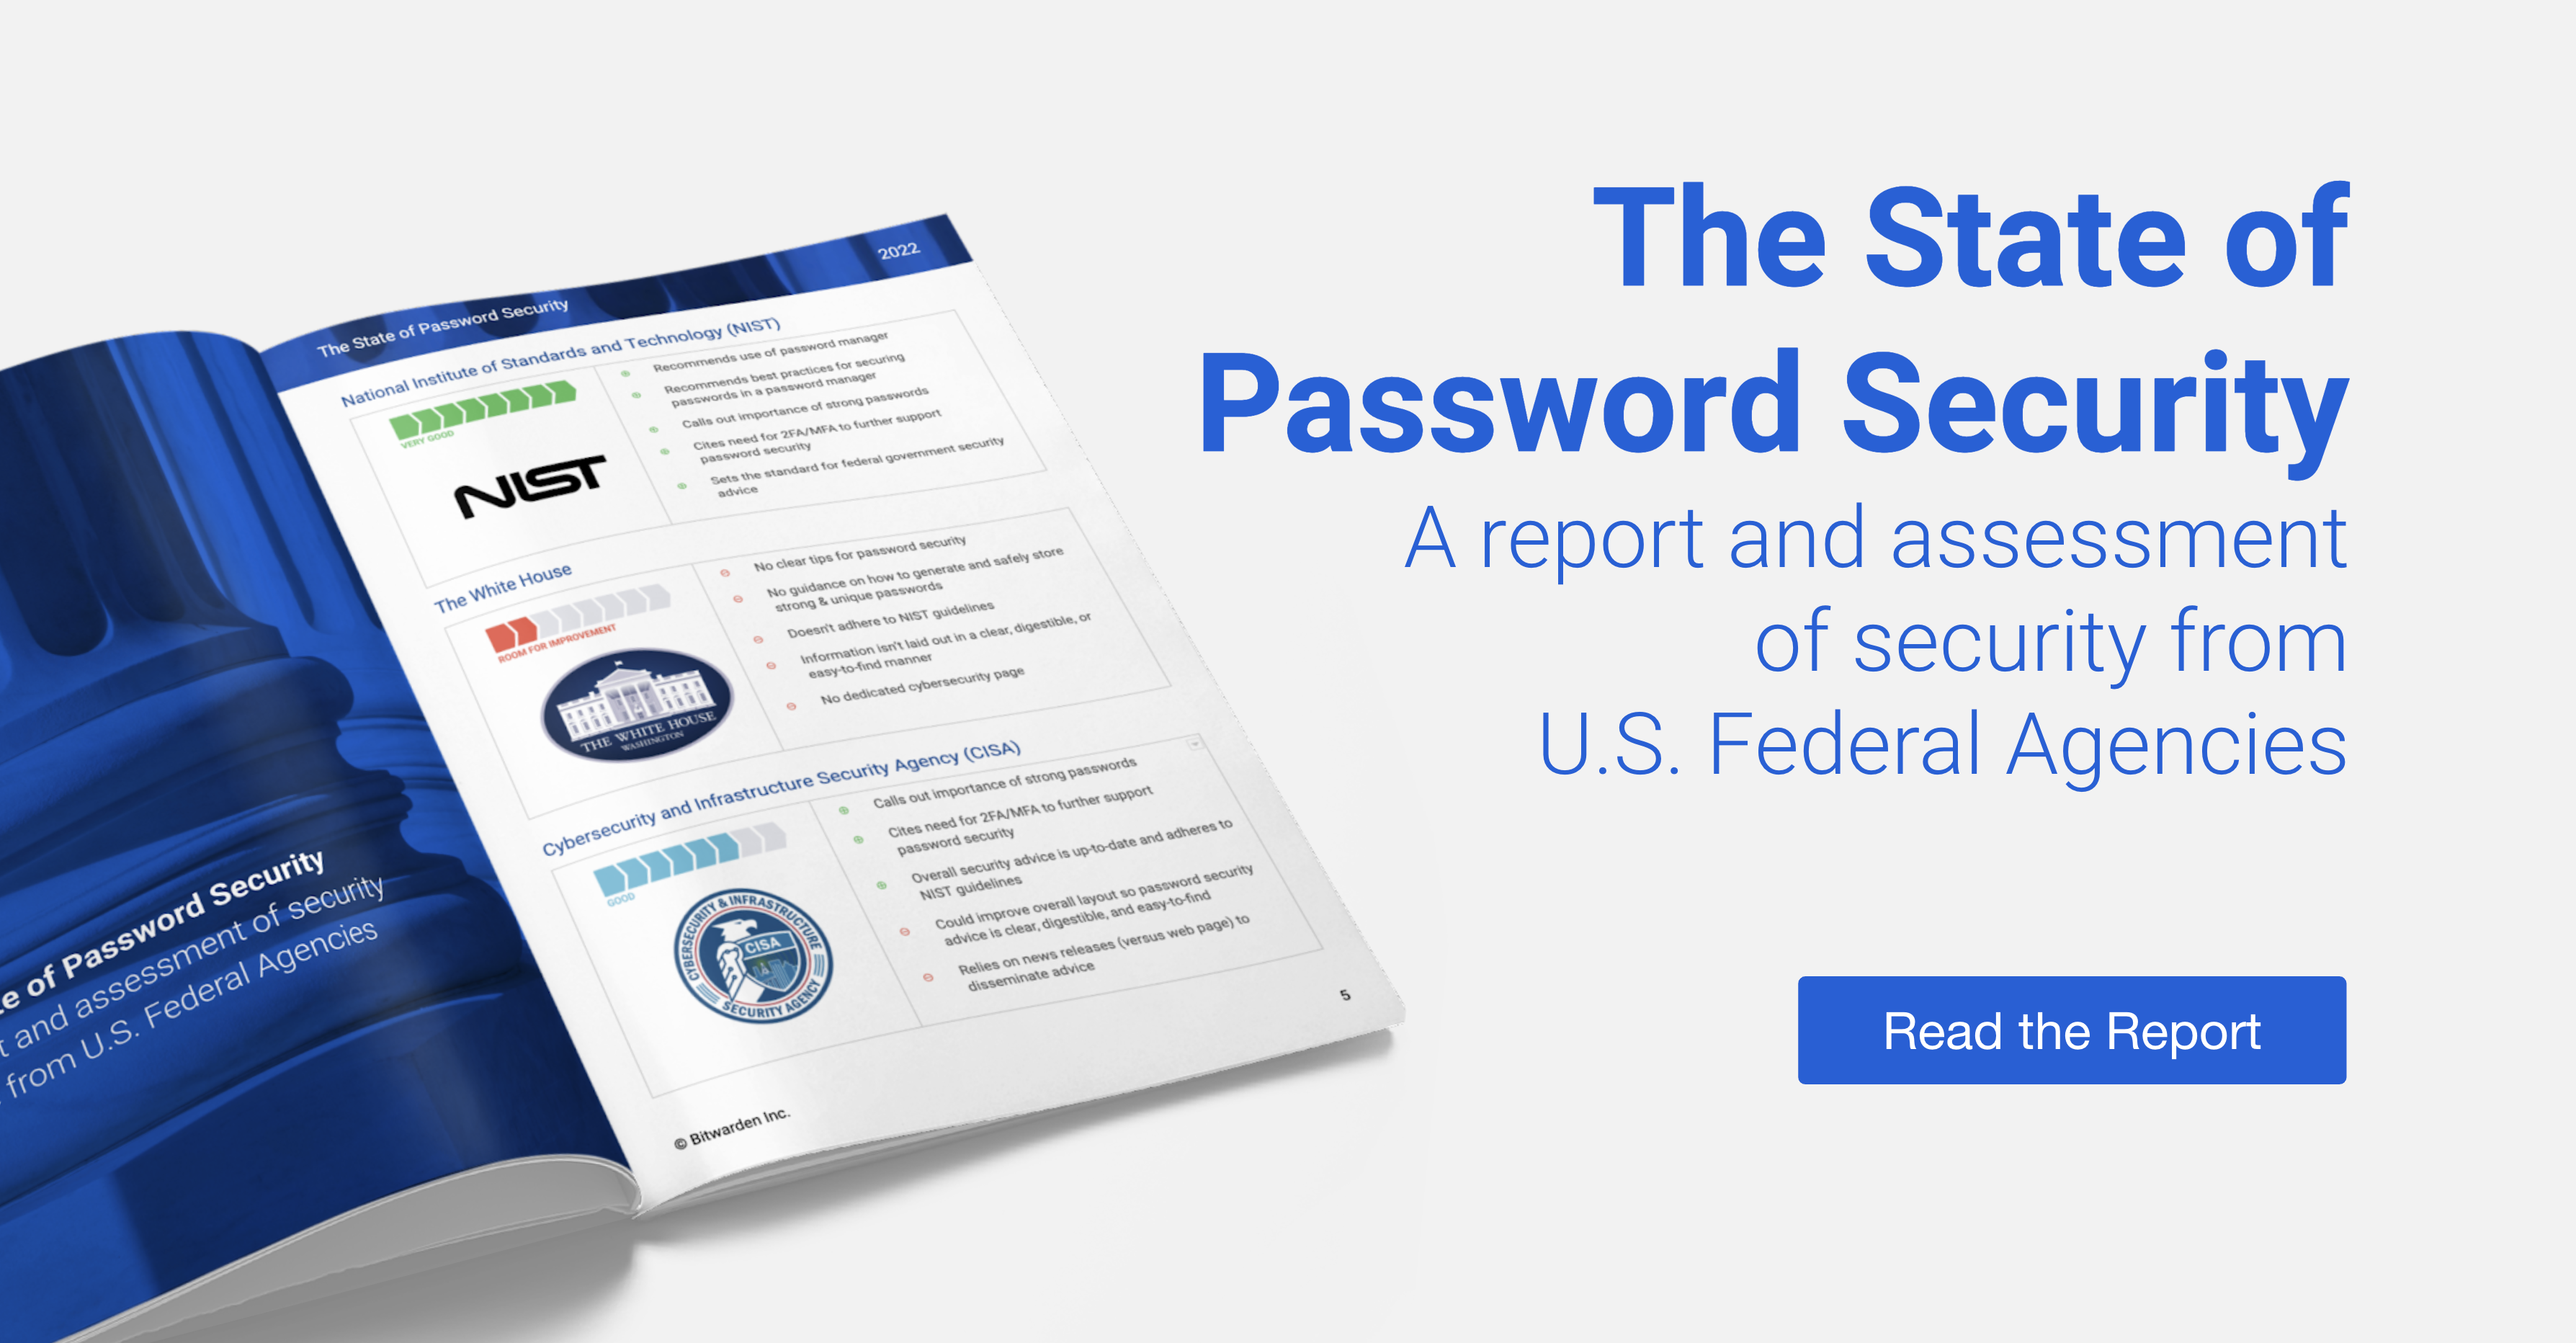 The State of Password Security Report